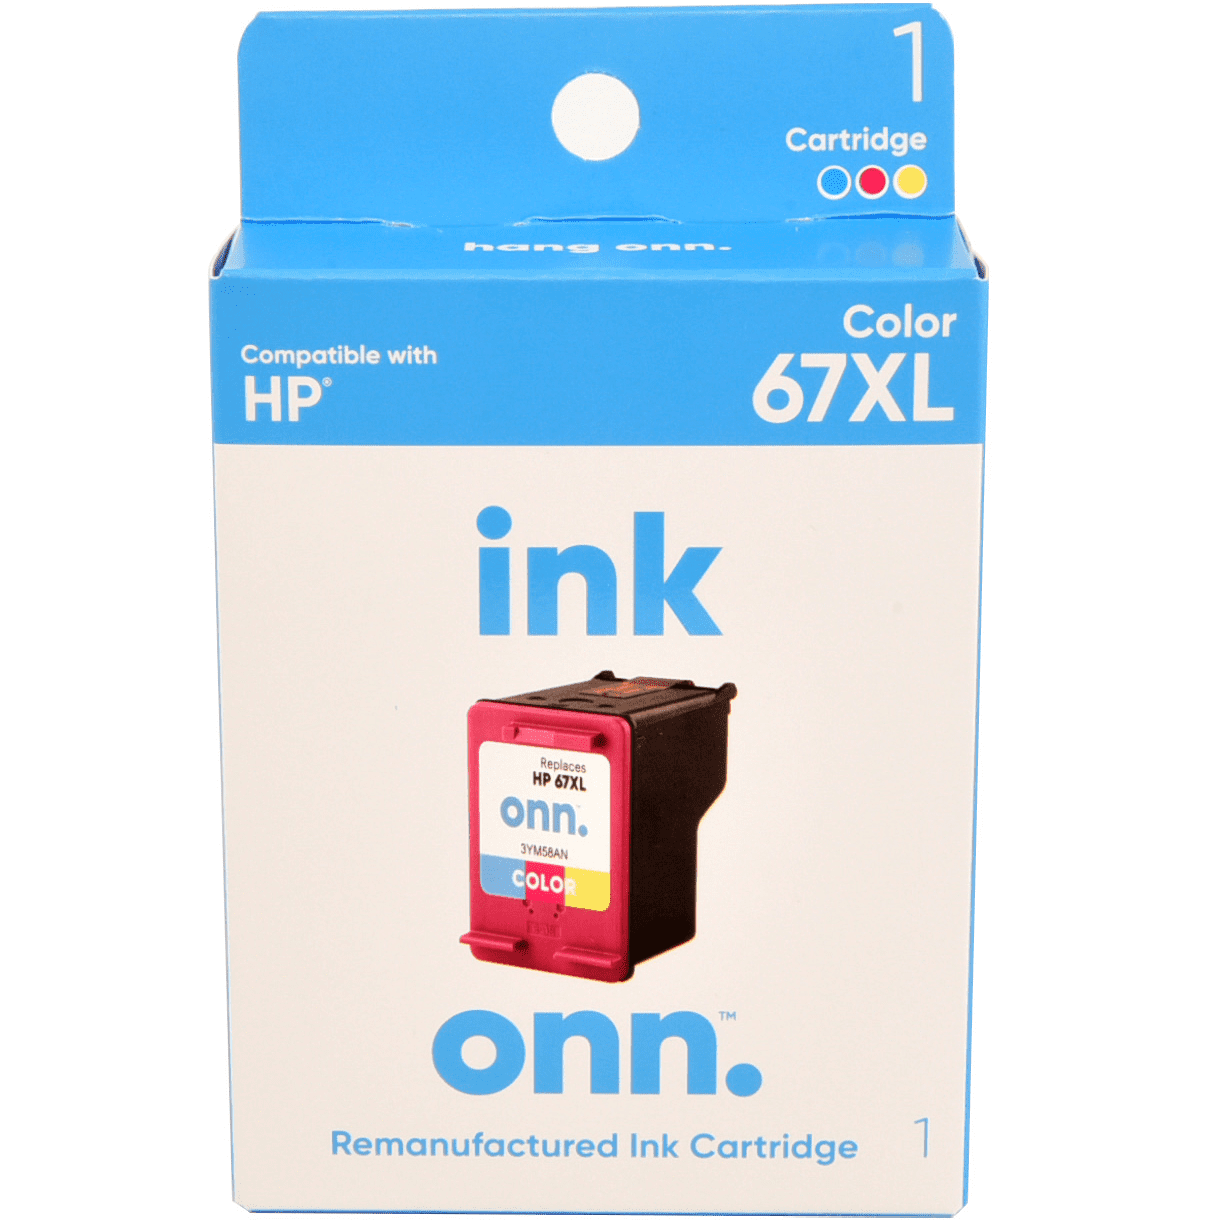 onn. Remanufactured Ink Cartridge, HP 67XL Color